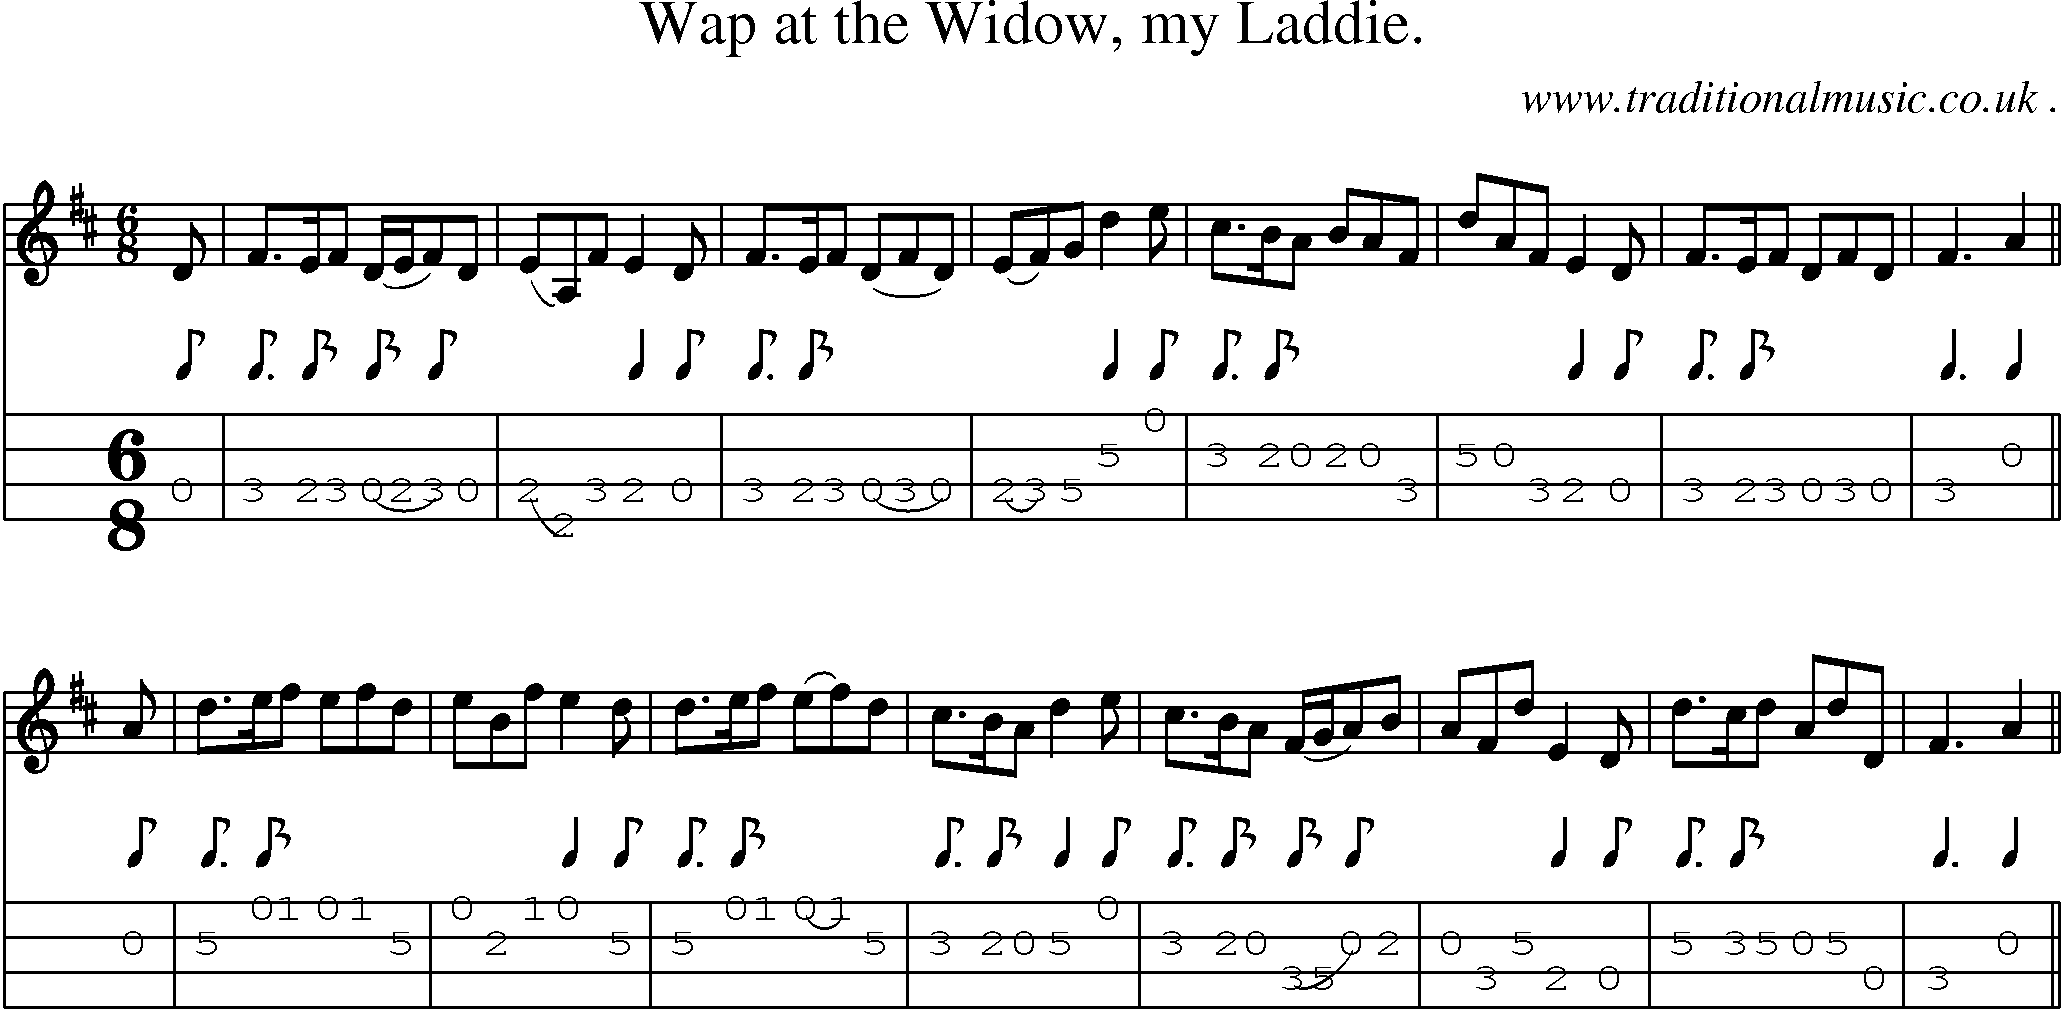 Sheet-Music and Mandolin Tabs for Wap At The Widow My Laddie